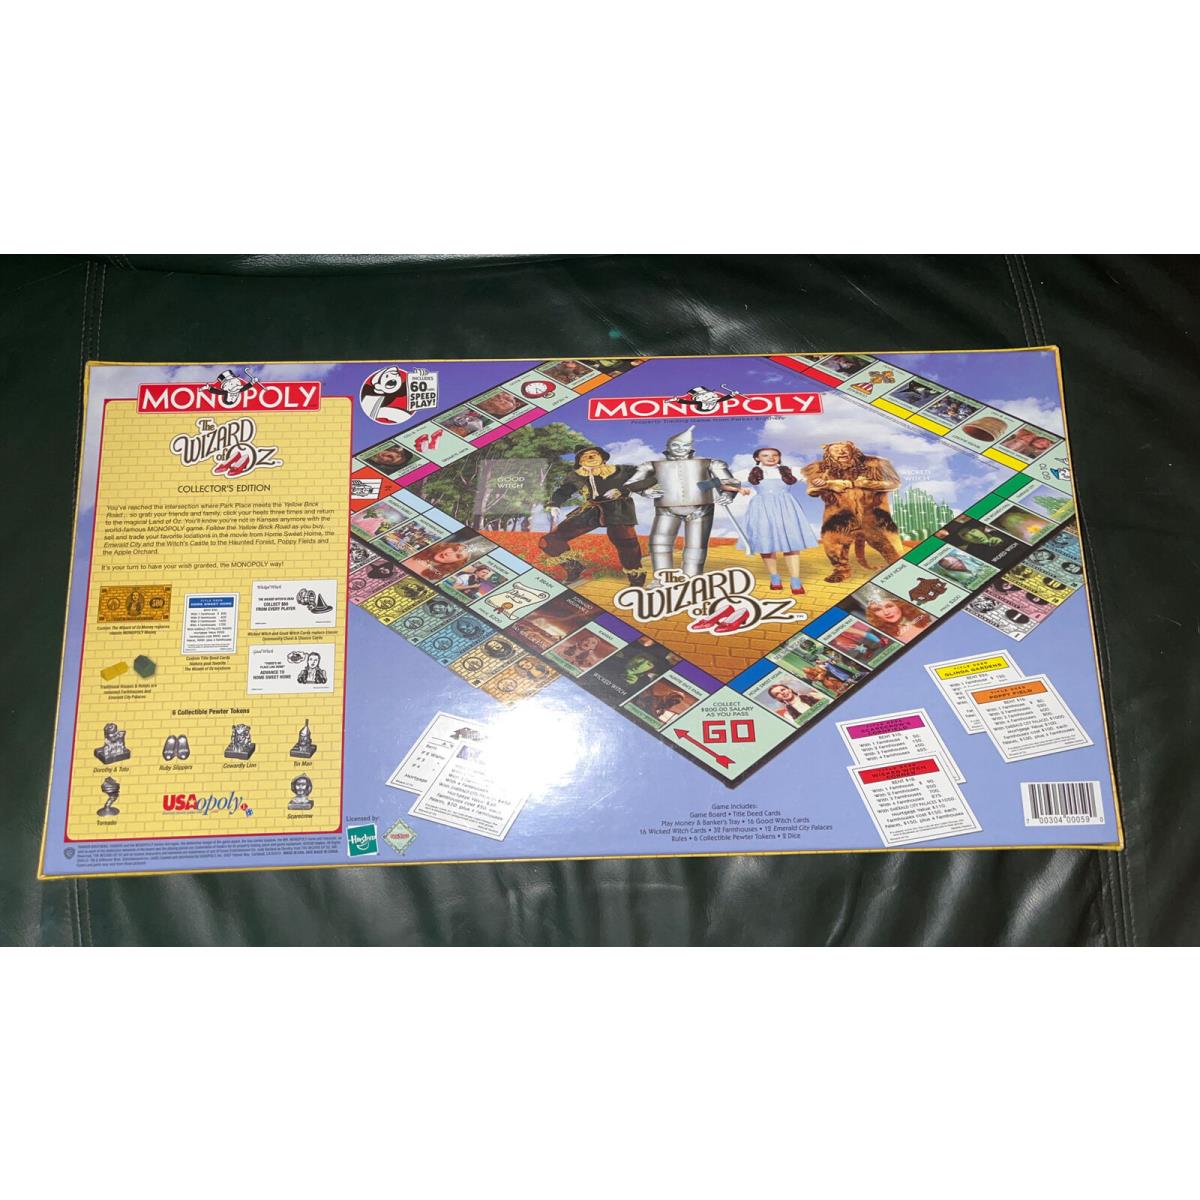 The Wizard of Oz Collectors Edition Monopoly Board Game